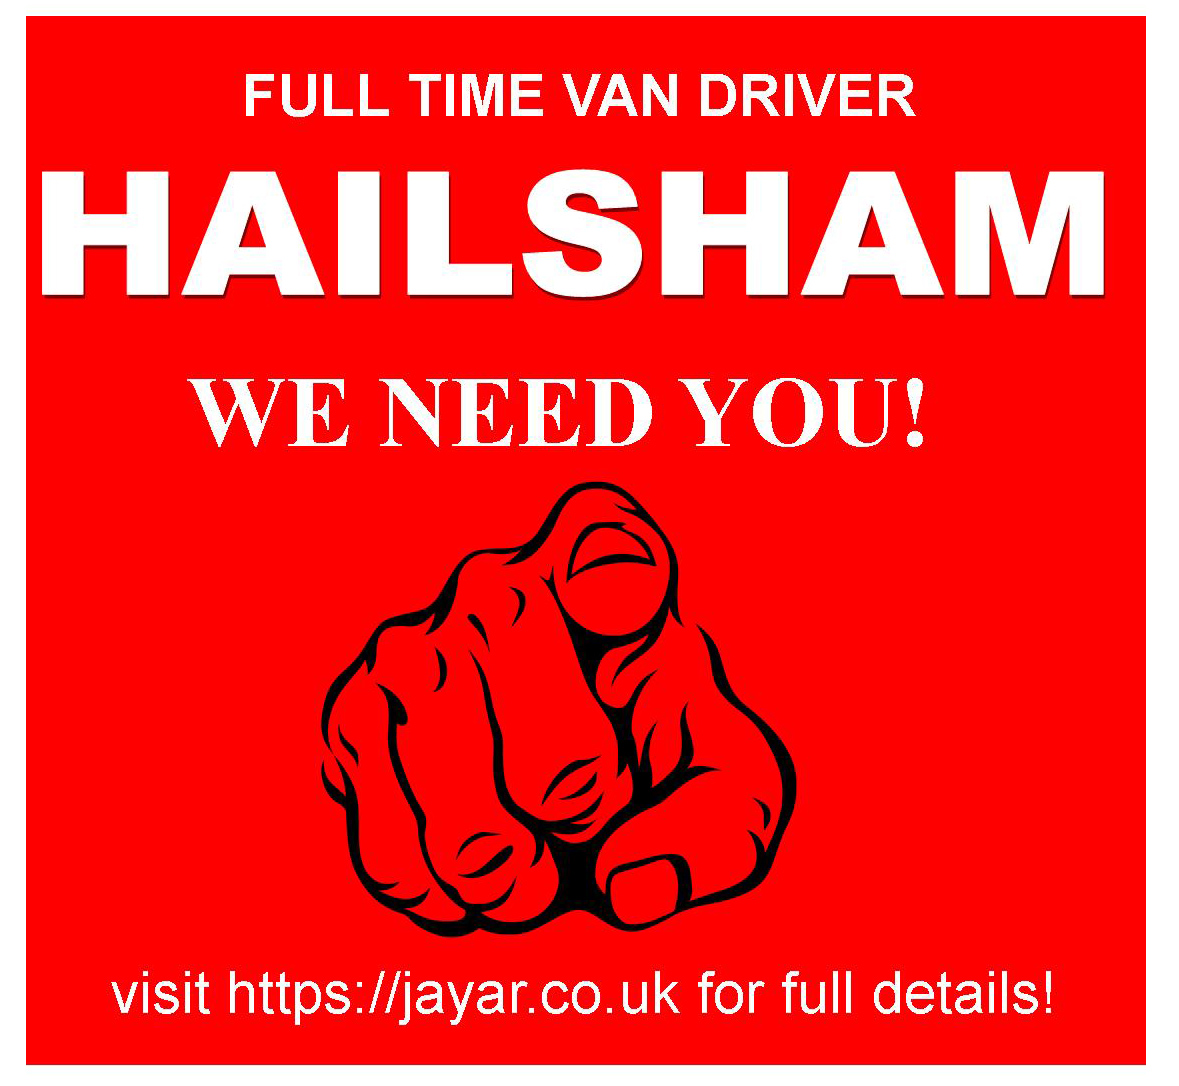 Join our brilliant team!
We are looking for a full time Van Driver, for our busy #Hailsham Branch
For a full job description & to apply, please visit
jayar.co.uk/.../full-time-…
Good Luck! 👍#sussexjobs #eastsussexjobs #hailshamjobs #drivingjobs #vandrivingjobs #vandriverjobs